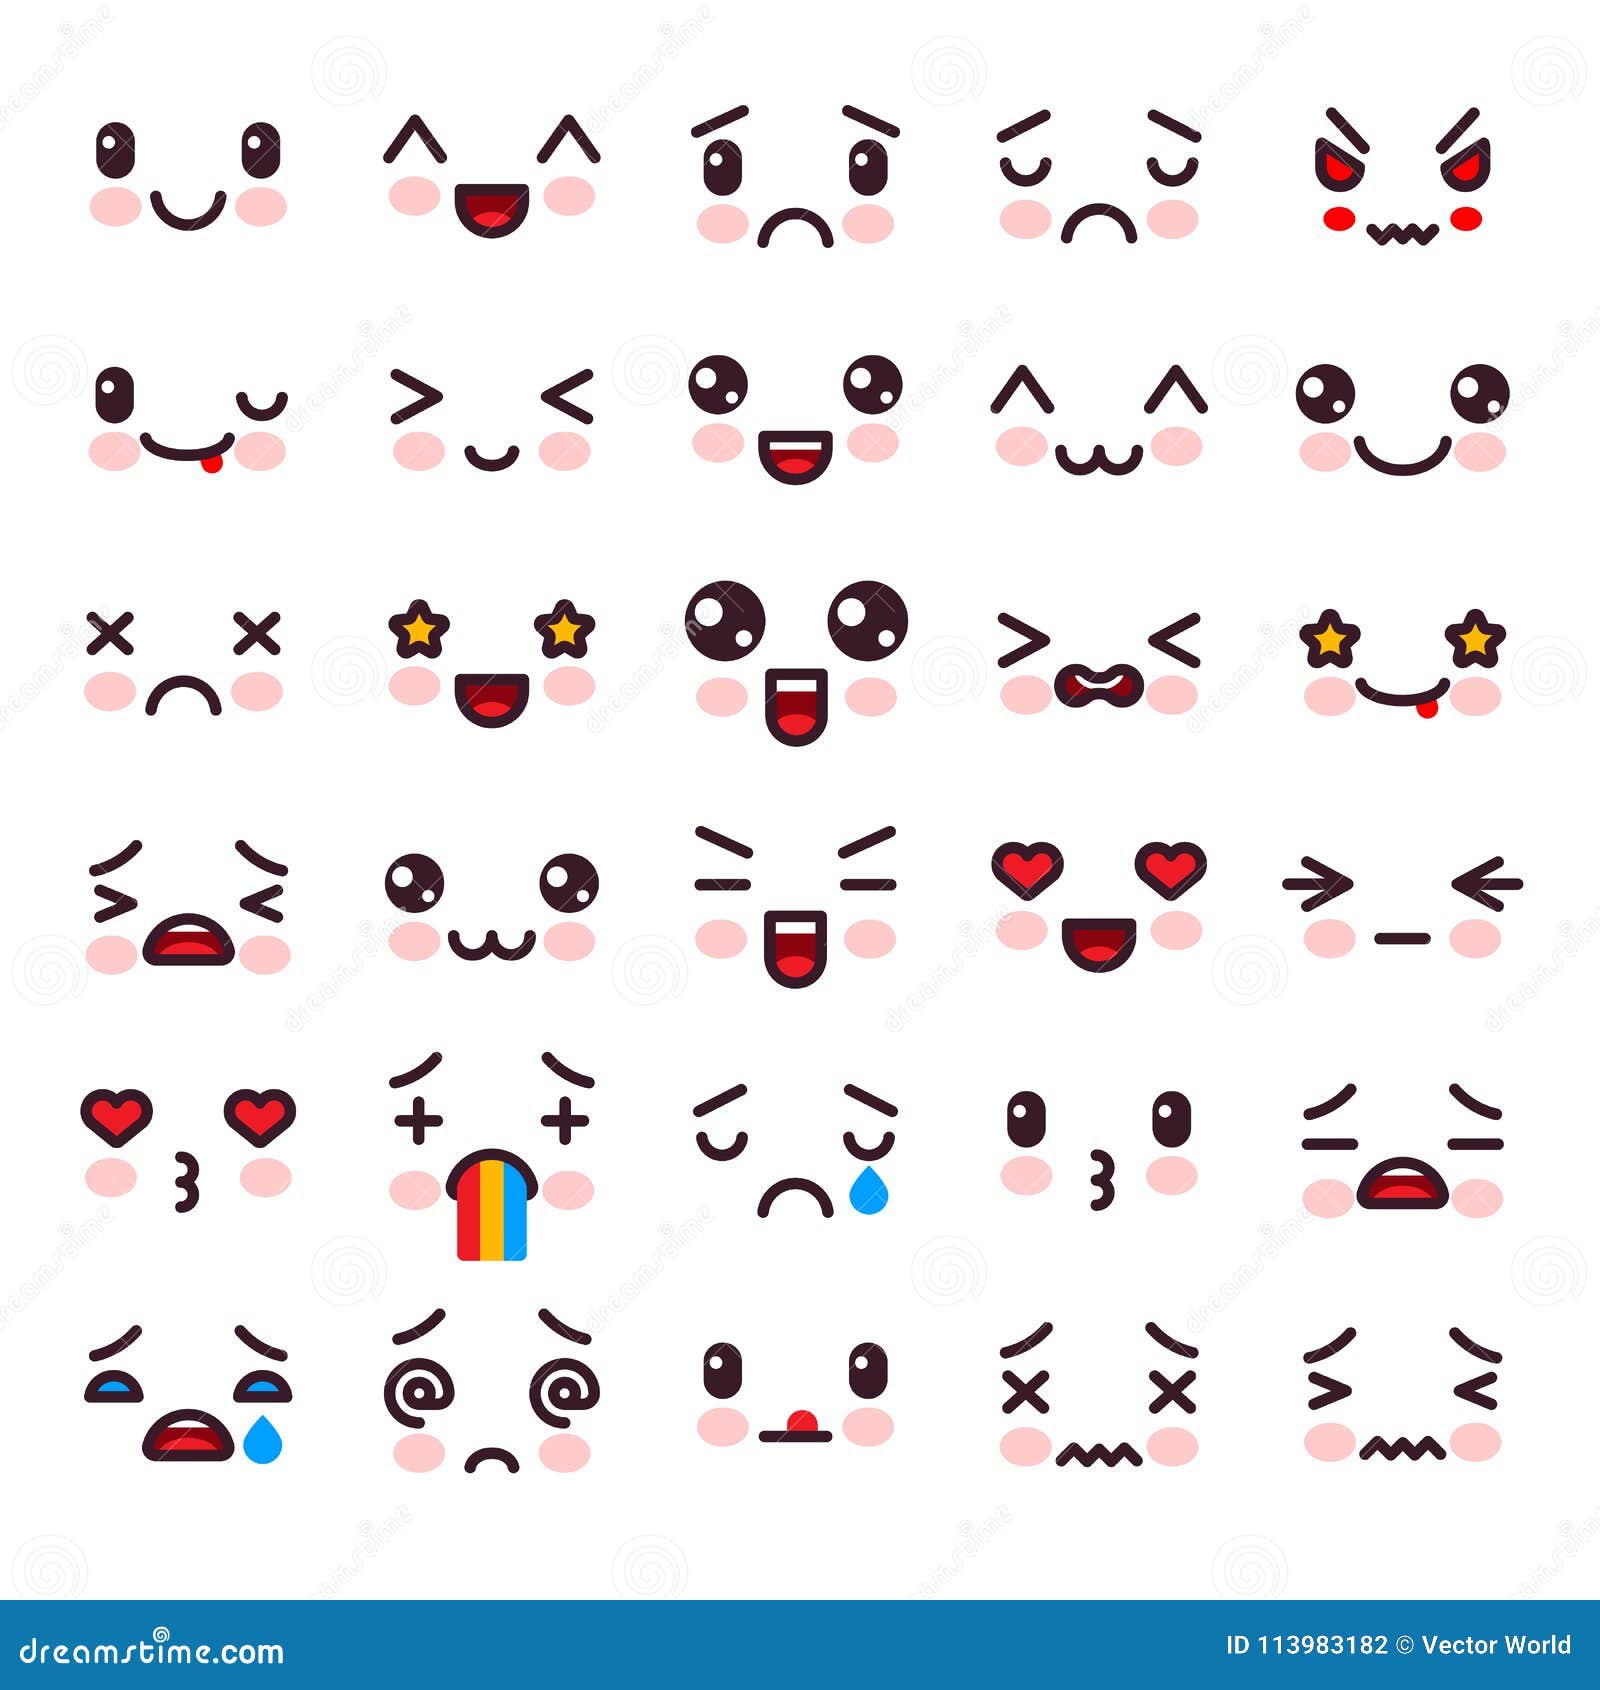 kawaii  cartoon emoticon character with different emotions and face expression  emotional set of